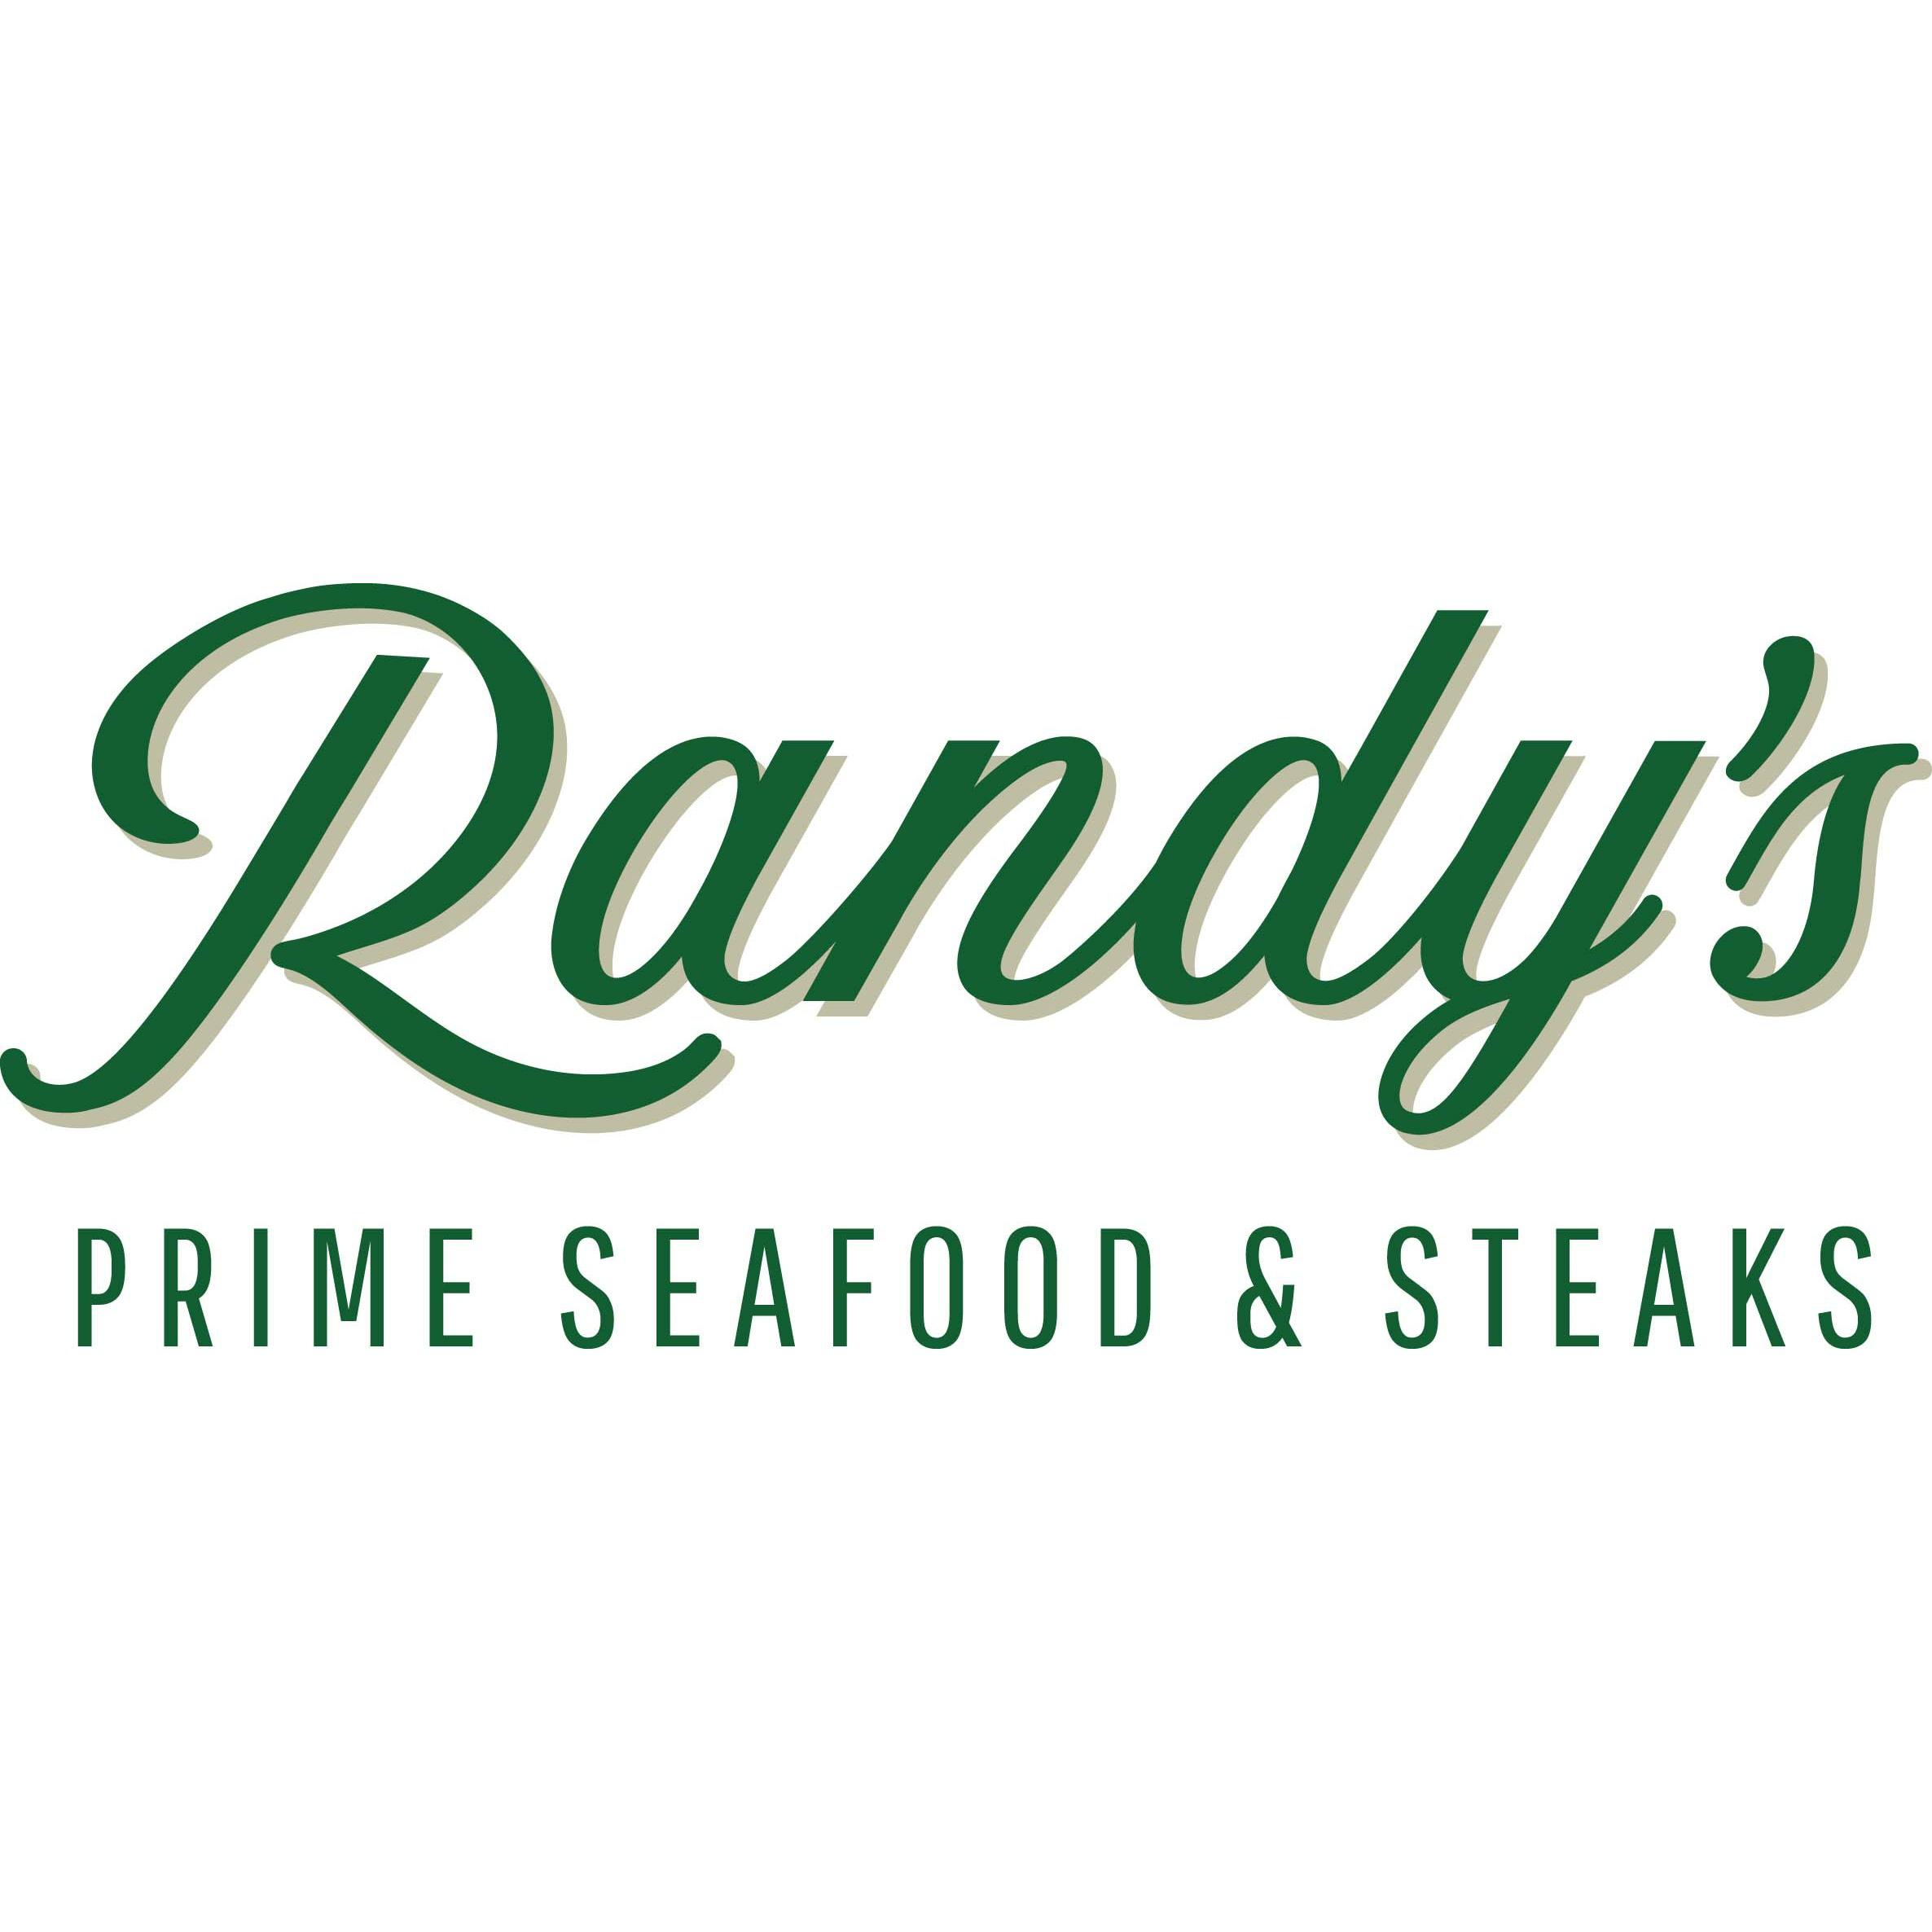 Randy's Prime Seafood and Steaks